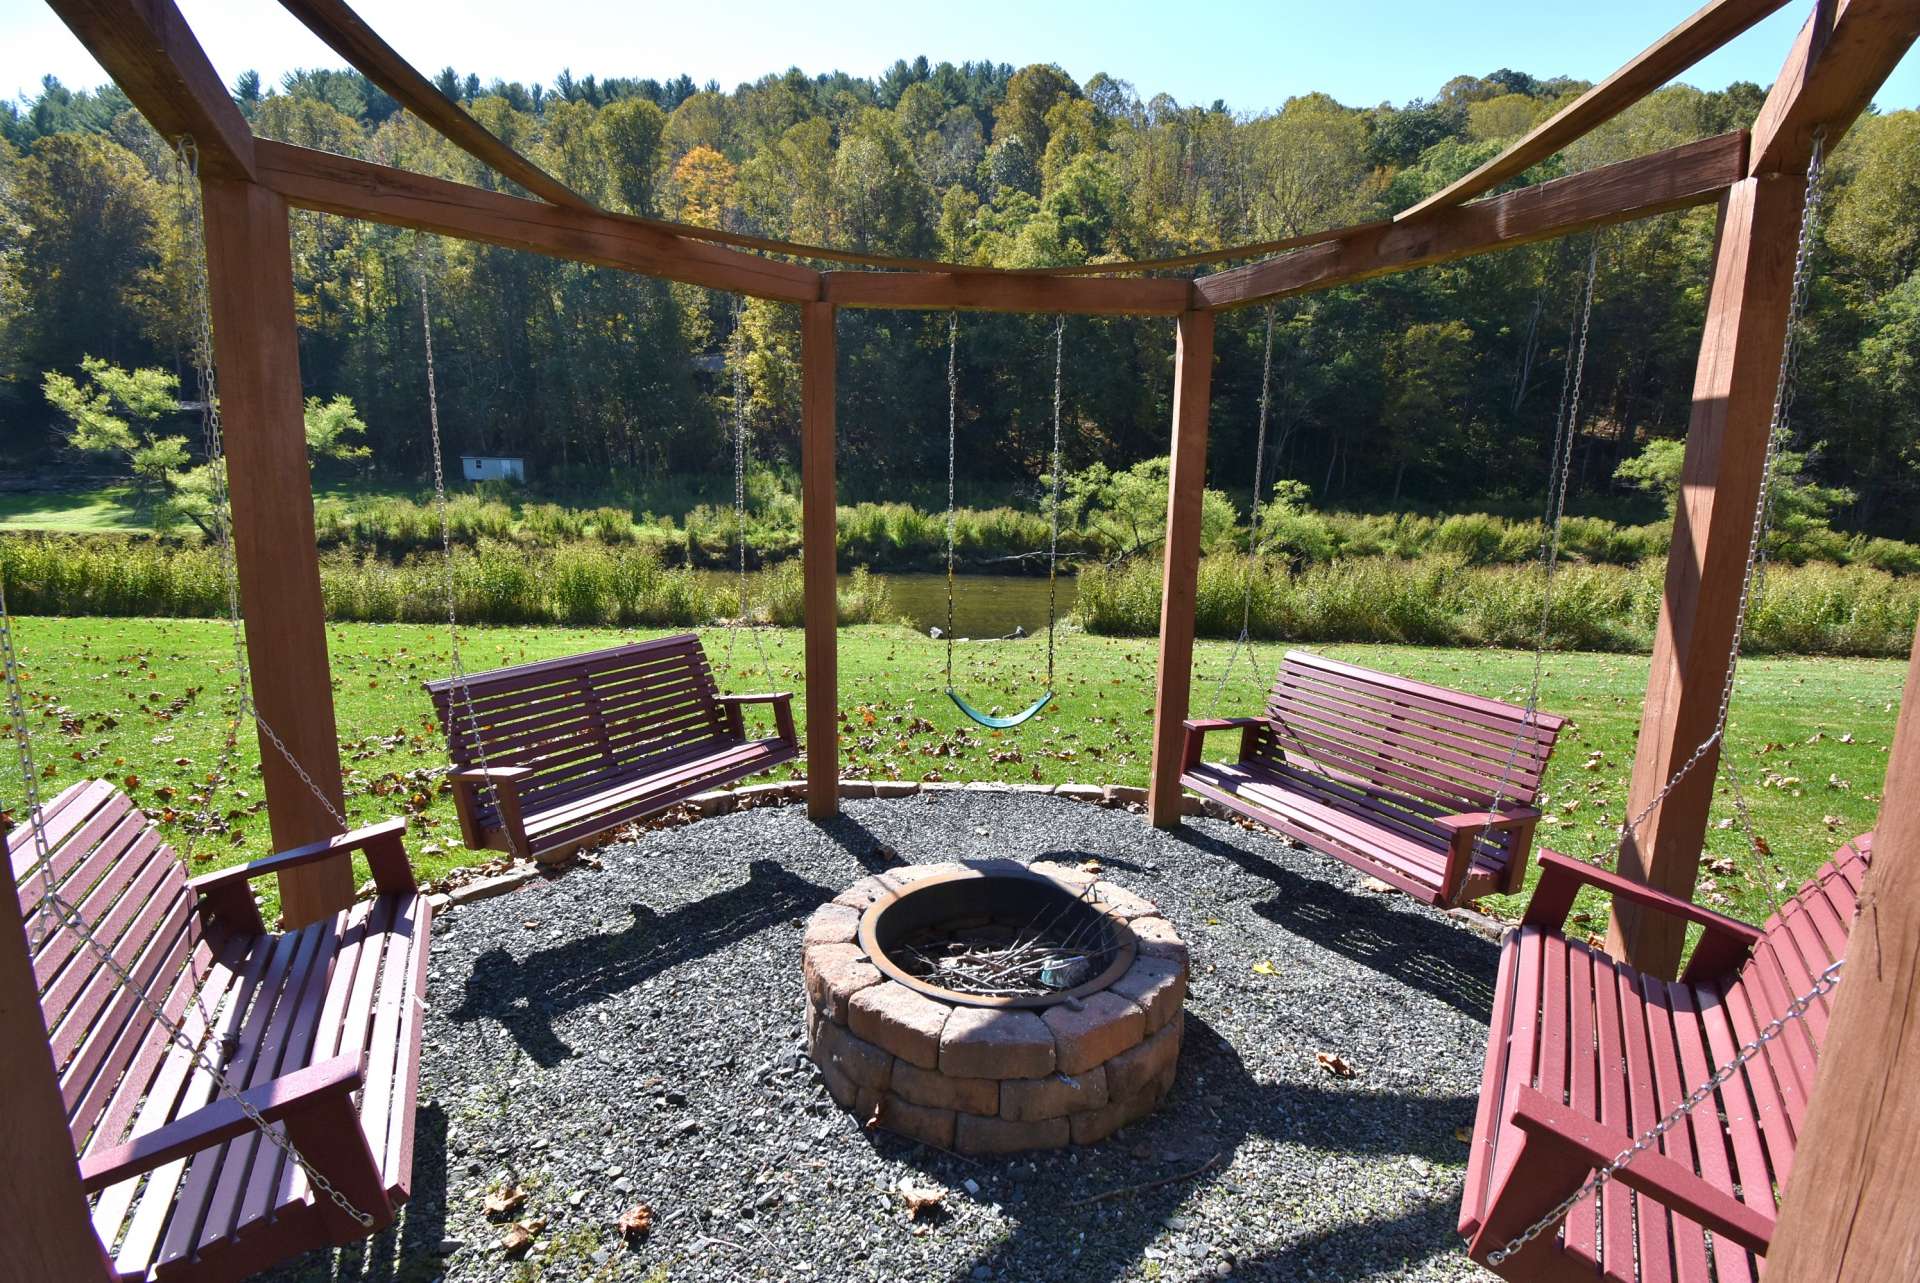 A stylish fire pit is the spot for s'mores and memories with friends and family with the sights and sounds of the river.